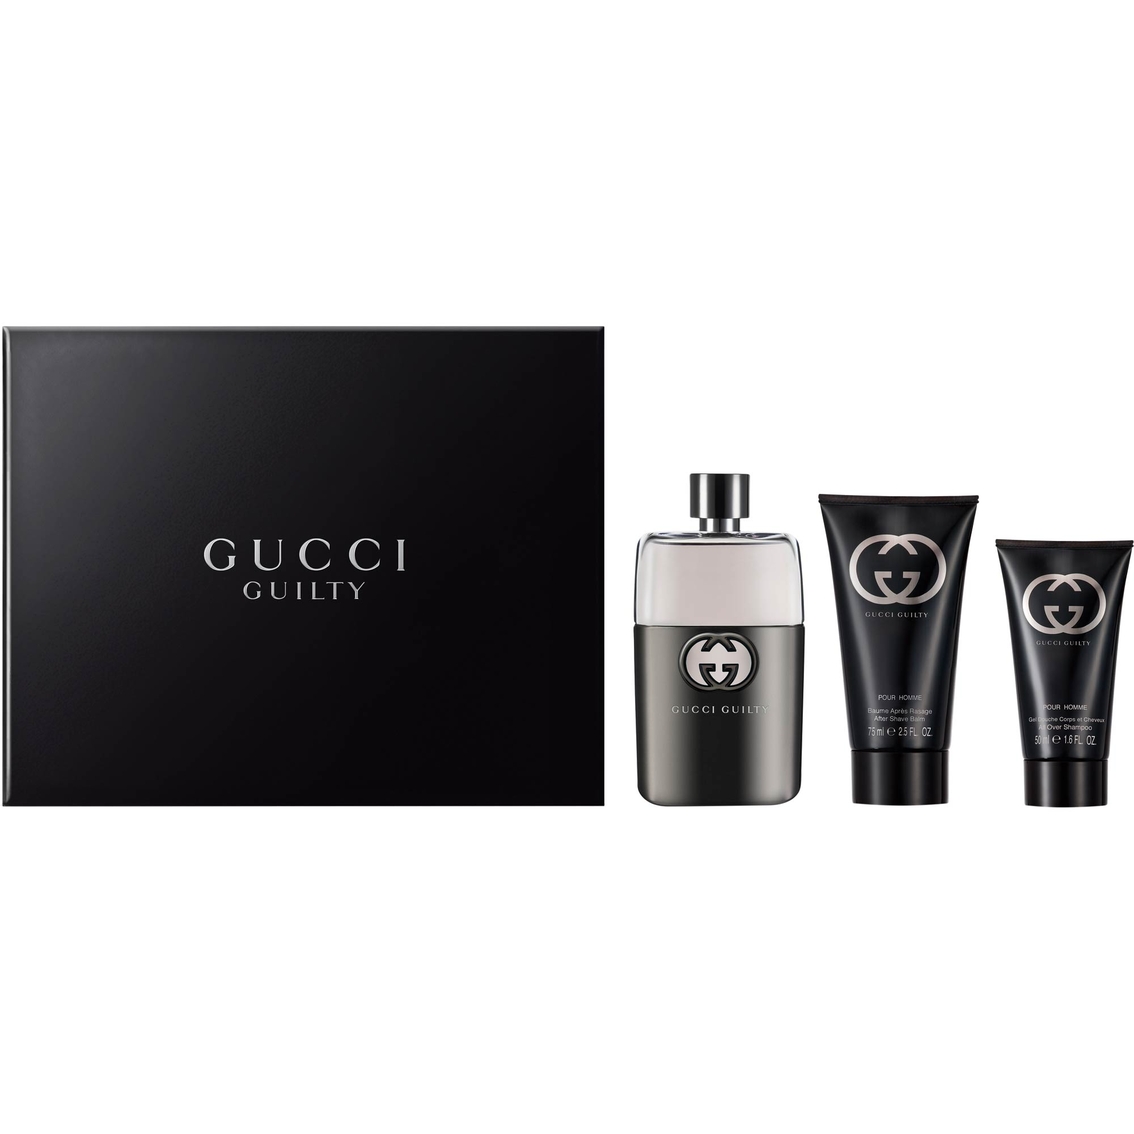 Gucci Guilty Pour Homme 3 Pc. Gift Set Gifts Sets For